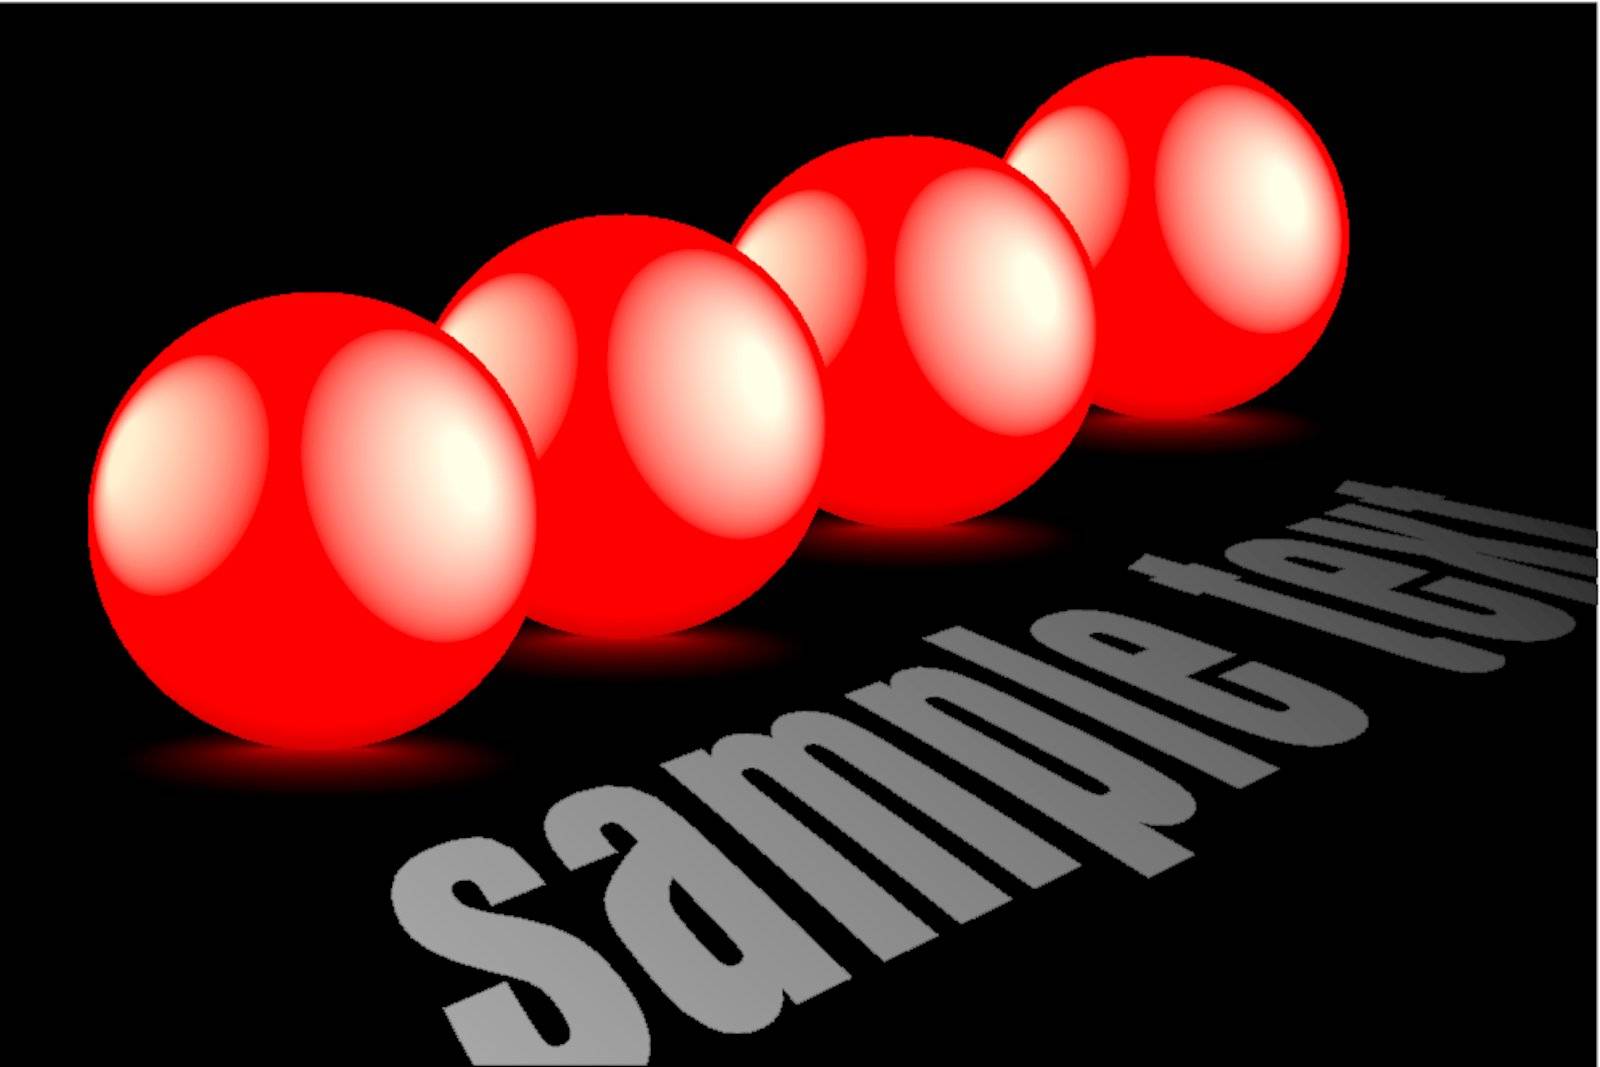 shiny 3d red bubbles with reflection - vector illustration